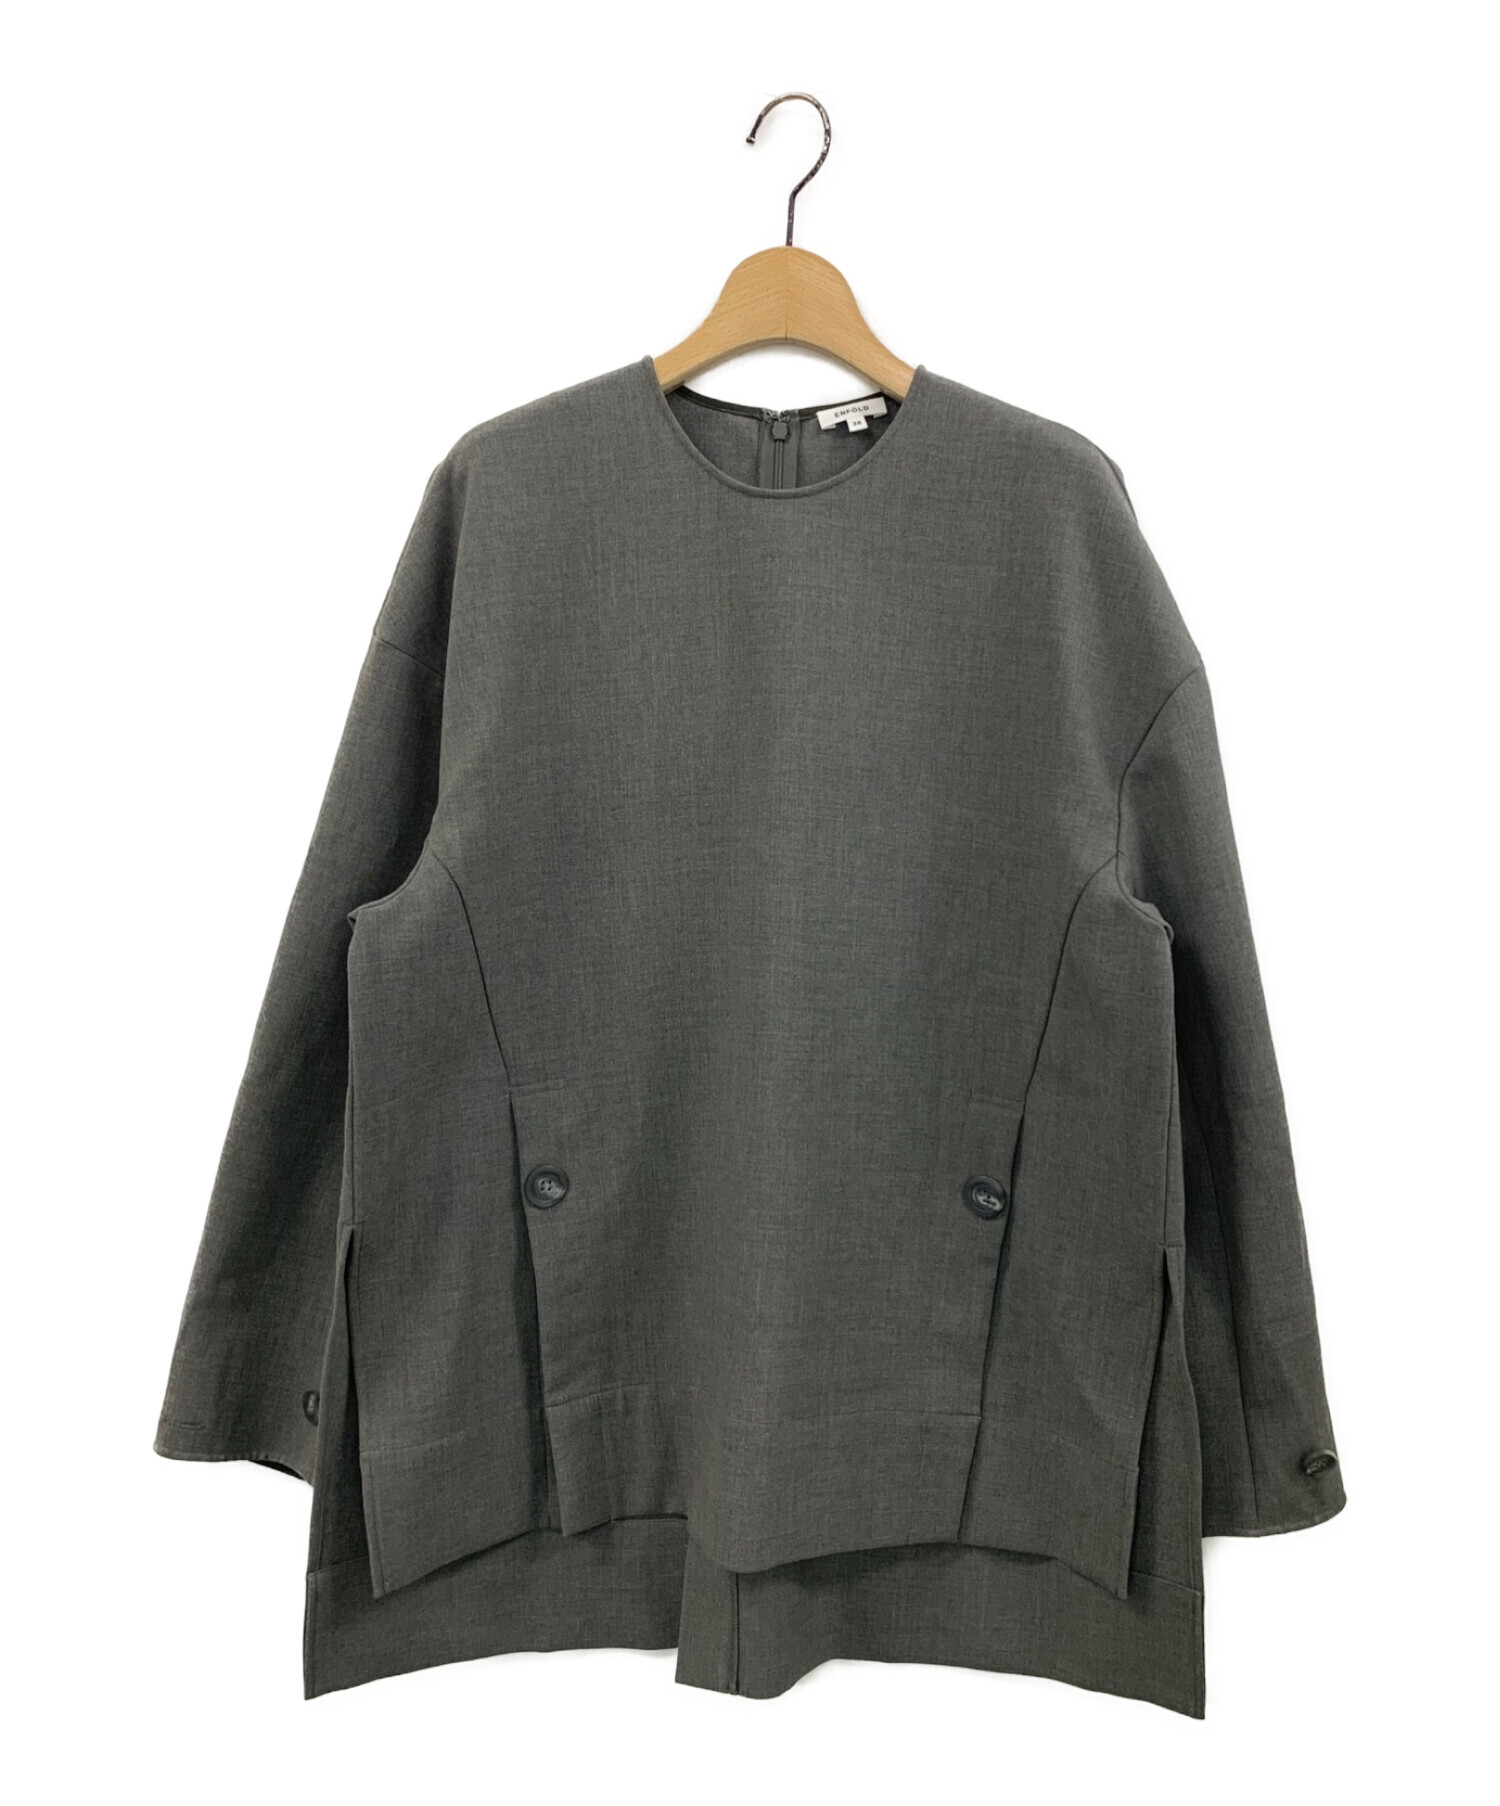 【ENFOLD】TWO-WAY-SLEEVE PULLOVER＊サイズ38